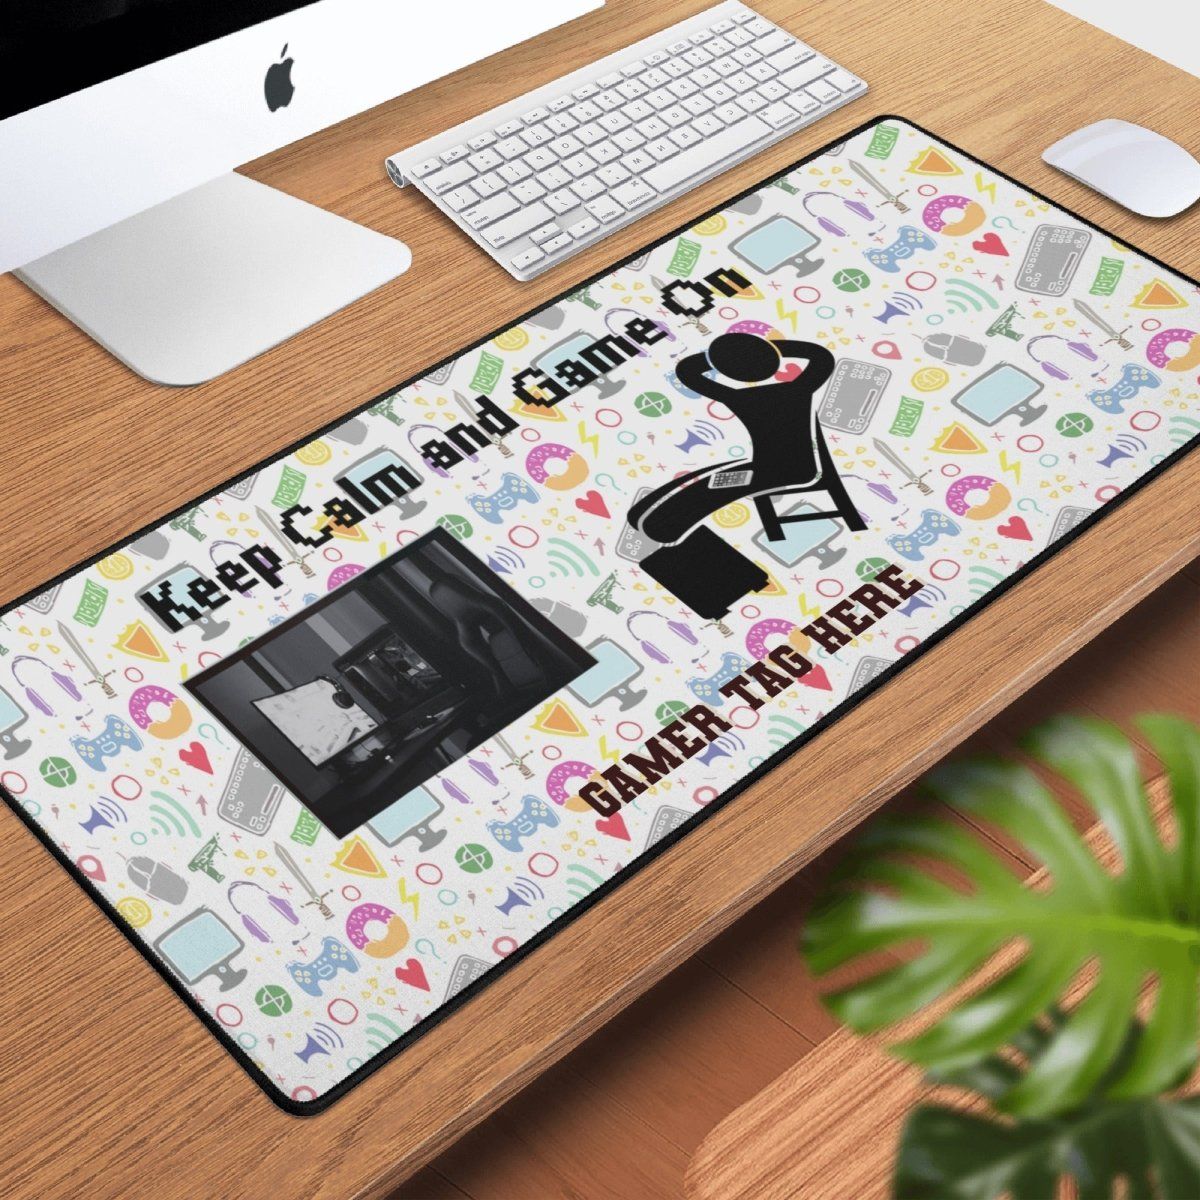 Retro Gaming Rectangle Mouse Mat - Keep Calm and Game On - Iron Phoenix GHG